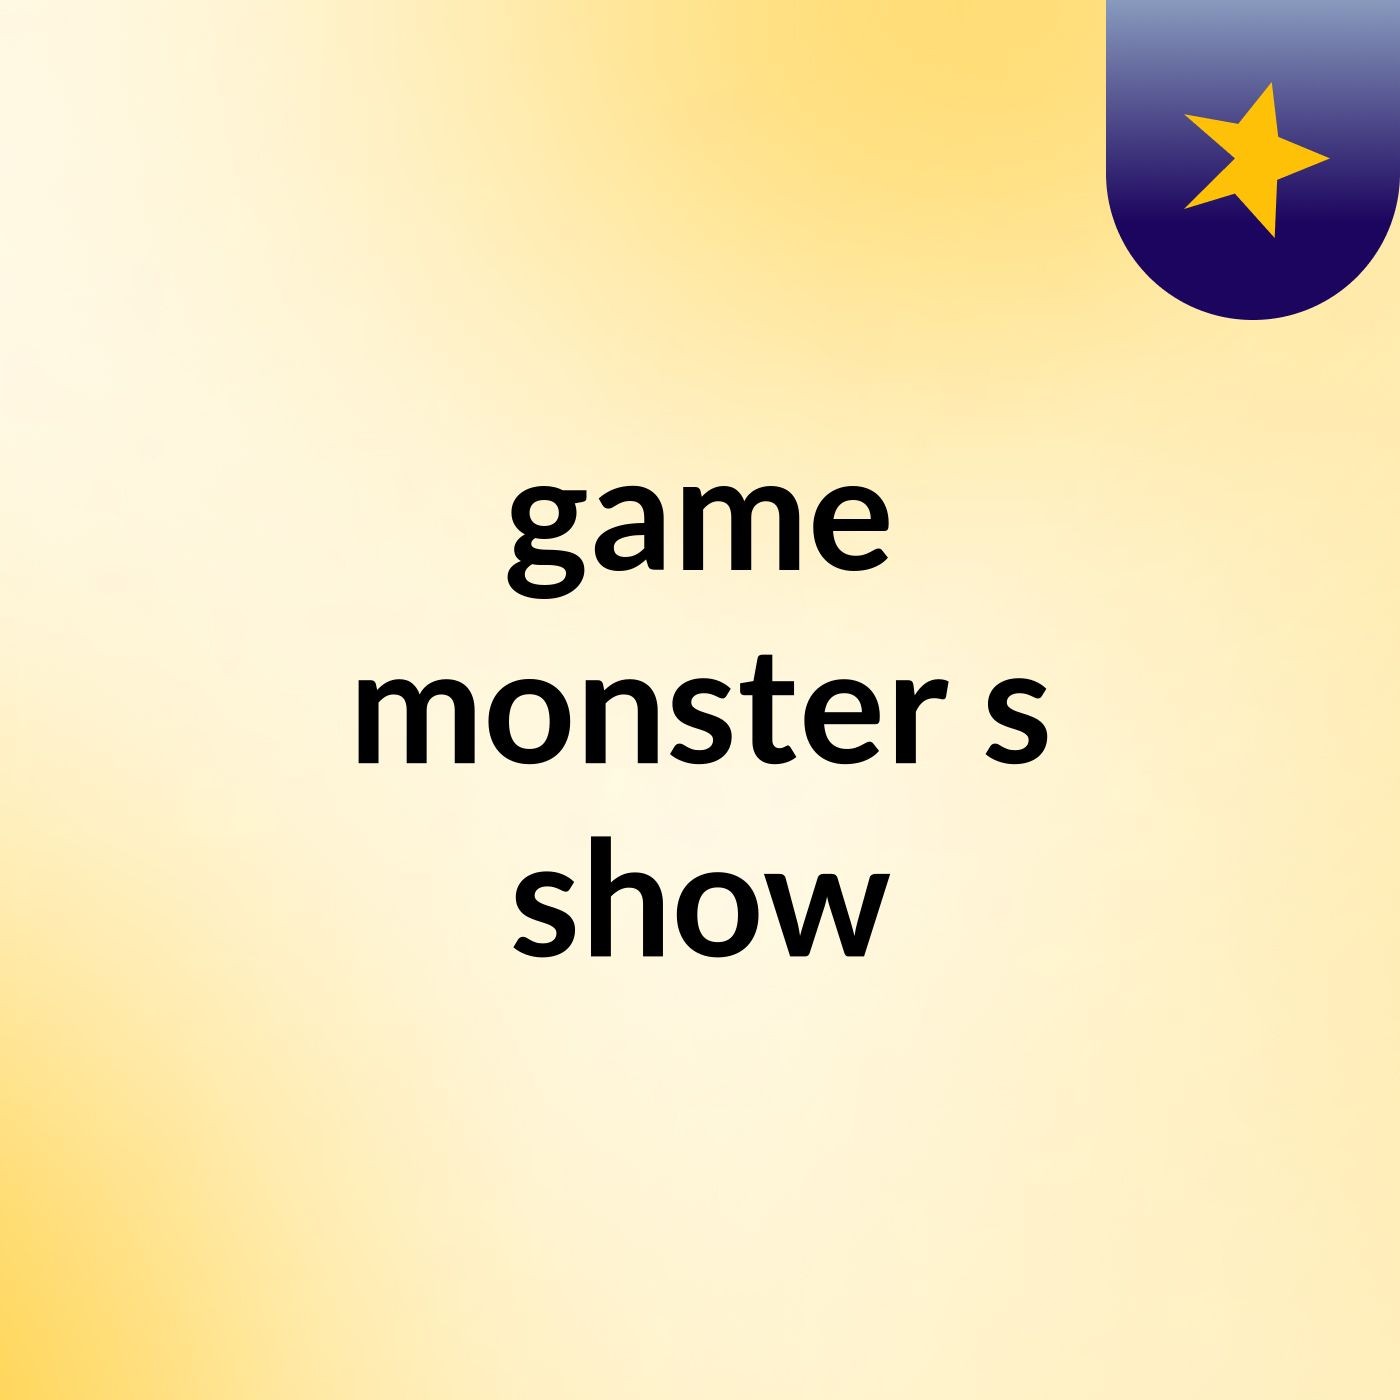 game monster's show